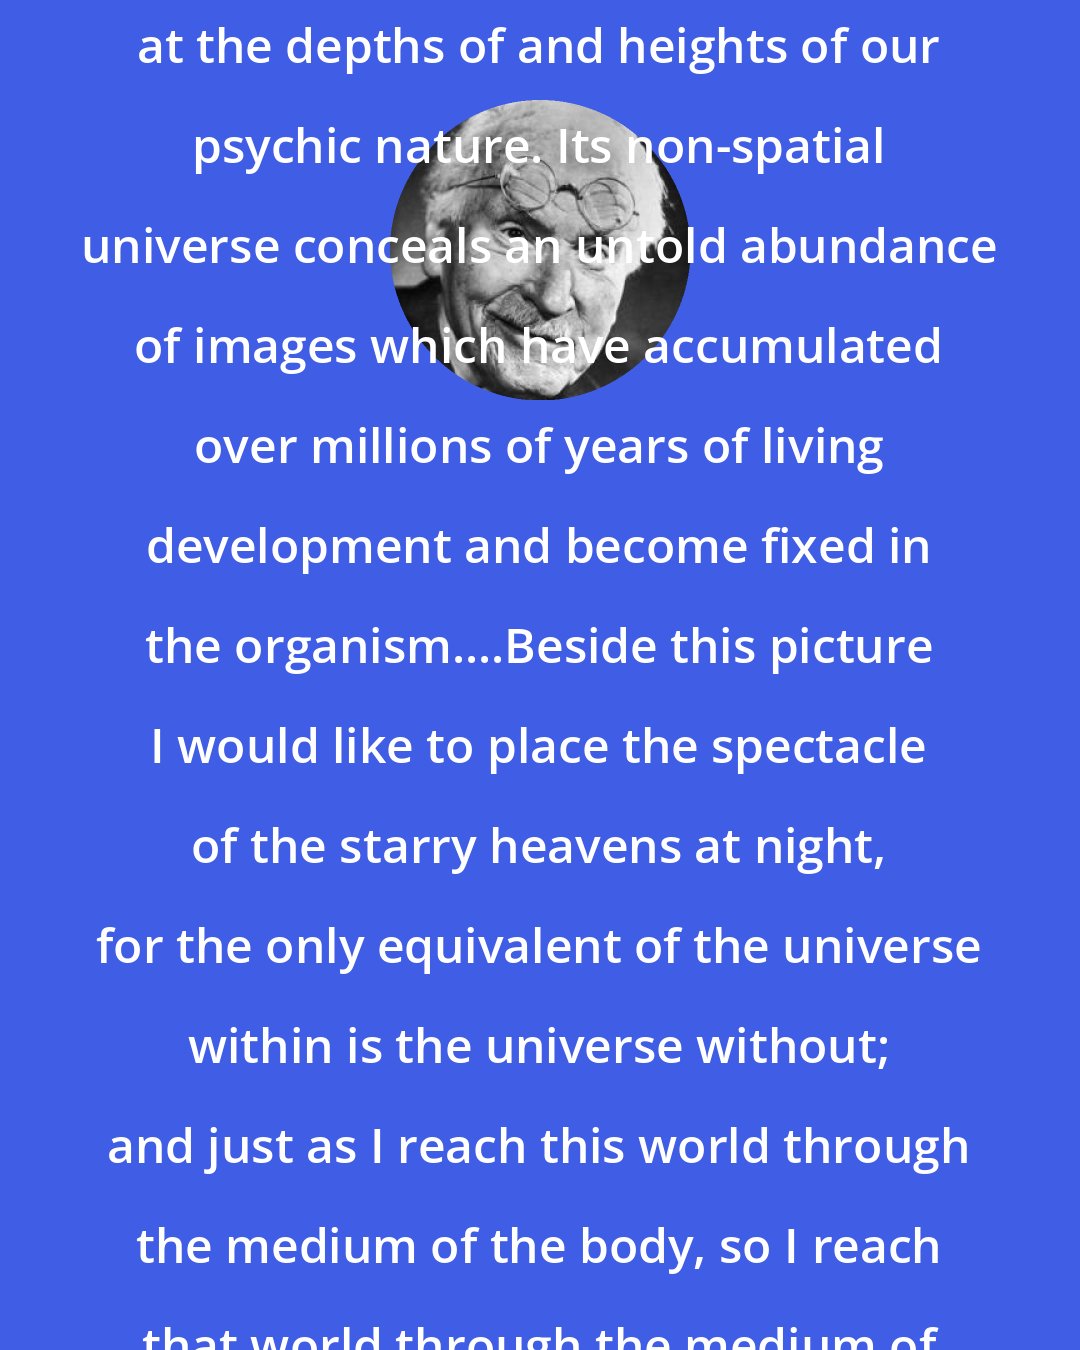 Carl Jung: I can only gaze with wonder and awe at the depths of and heights of our psychic nature. Its non-spatial universe conceals an untold abundance of images which have accumulated over millions of years of living development and become fixed in the organism....Beside this picture I would like to place the spectacle of the starry heavens at night, for the only equivalent of the universe within is the universe without; and just as I reach this world through the medium of the body, so I reach that world through the medium of the psyche.